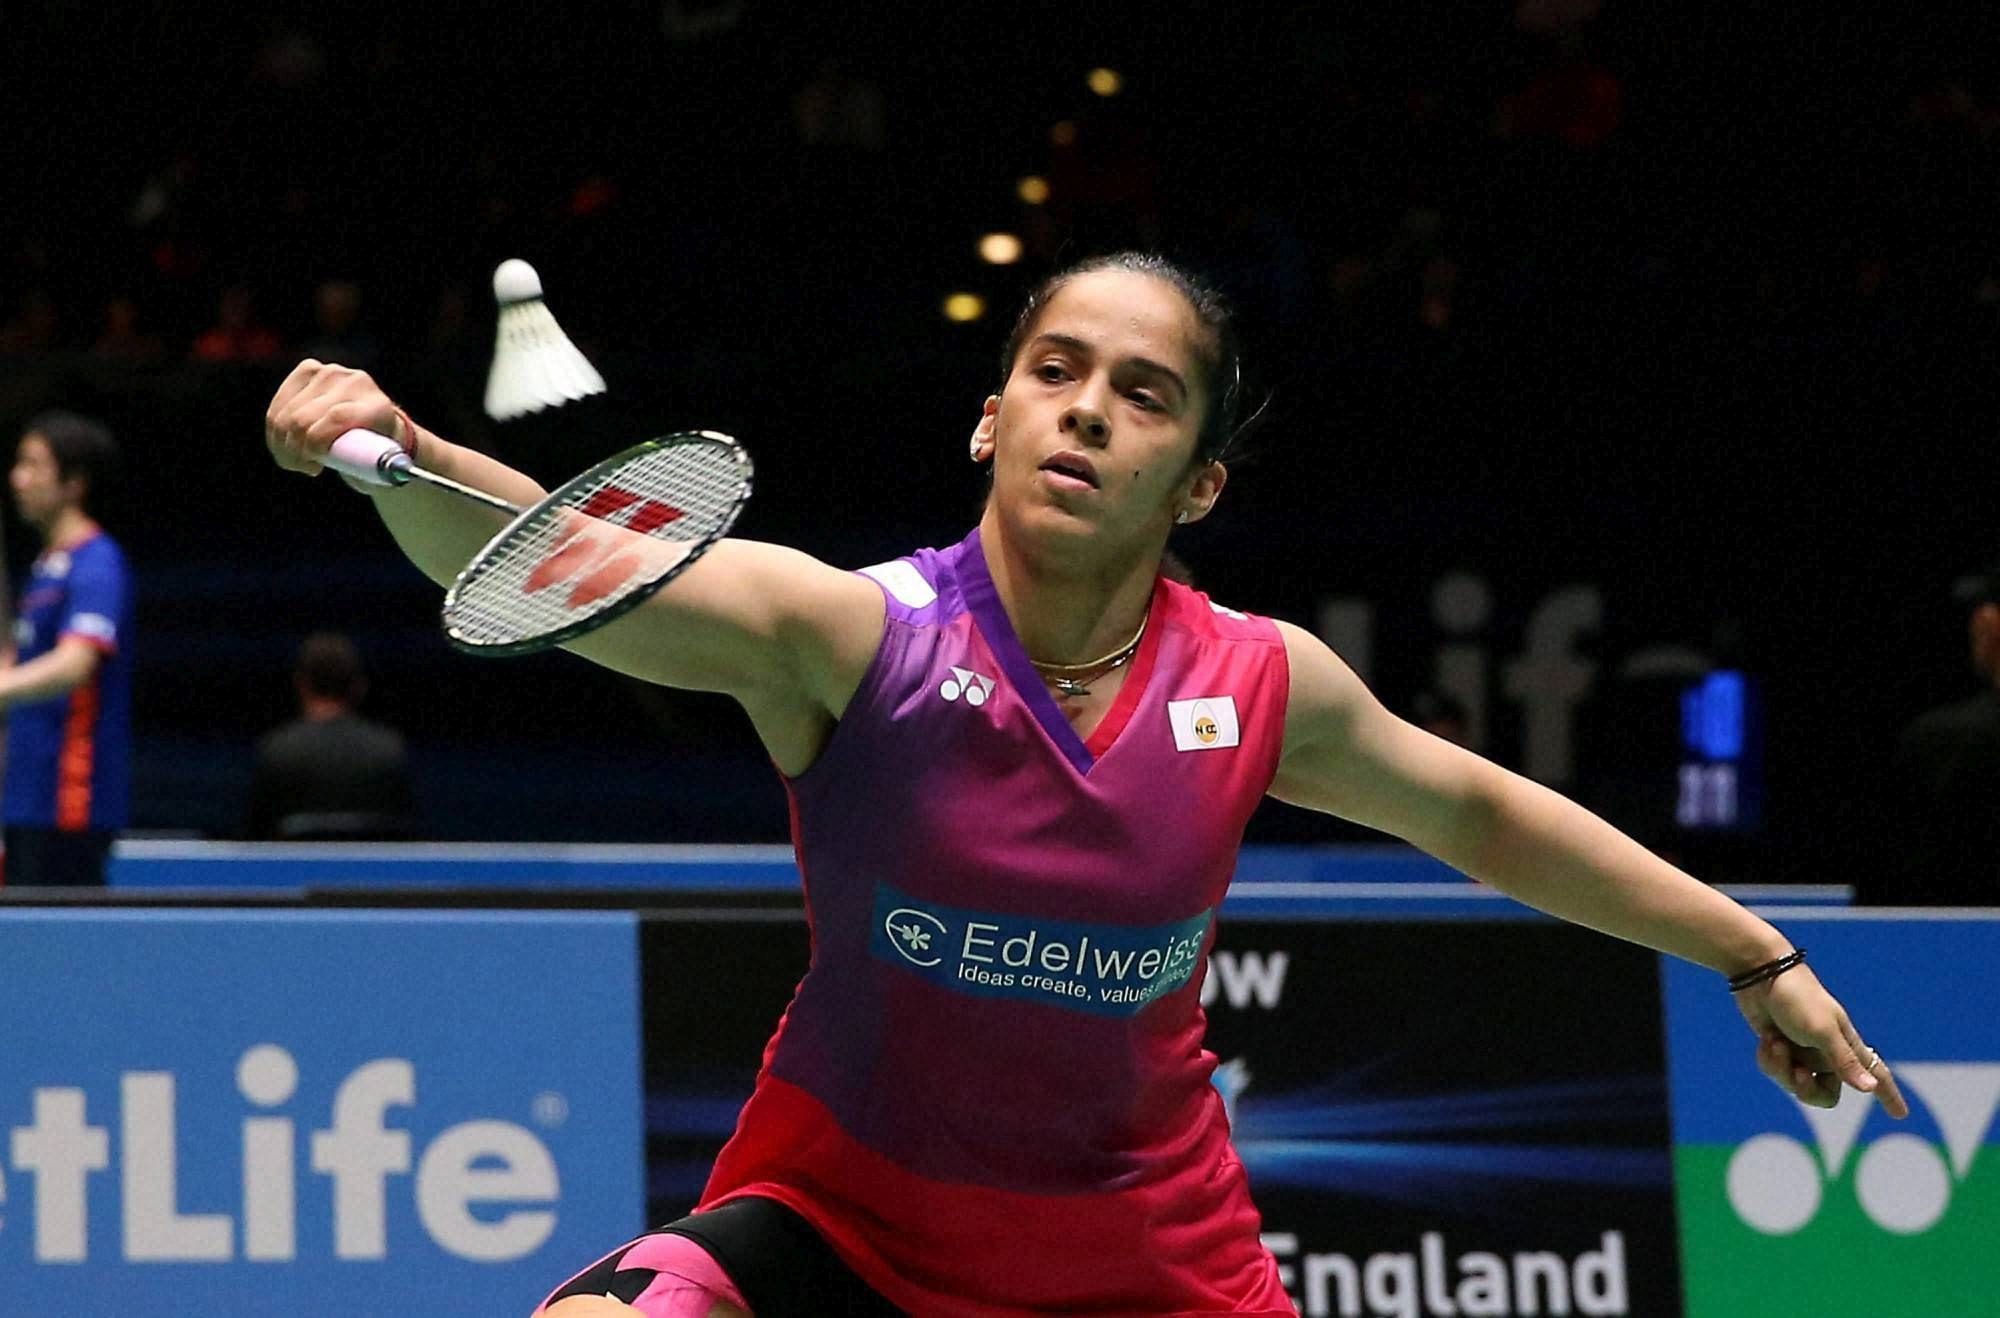 Swiss Open: Saina Nehwal, Prannoy advance to quarter-finals in Basel - Firstpost